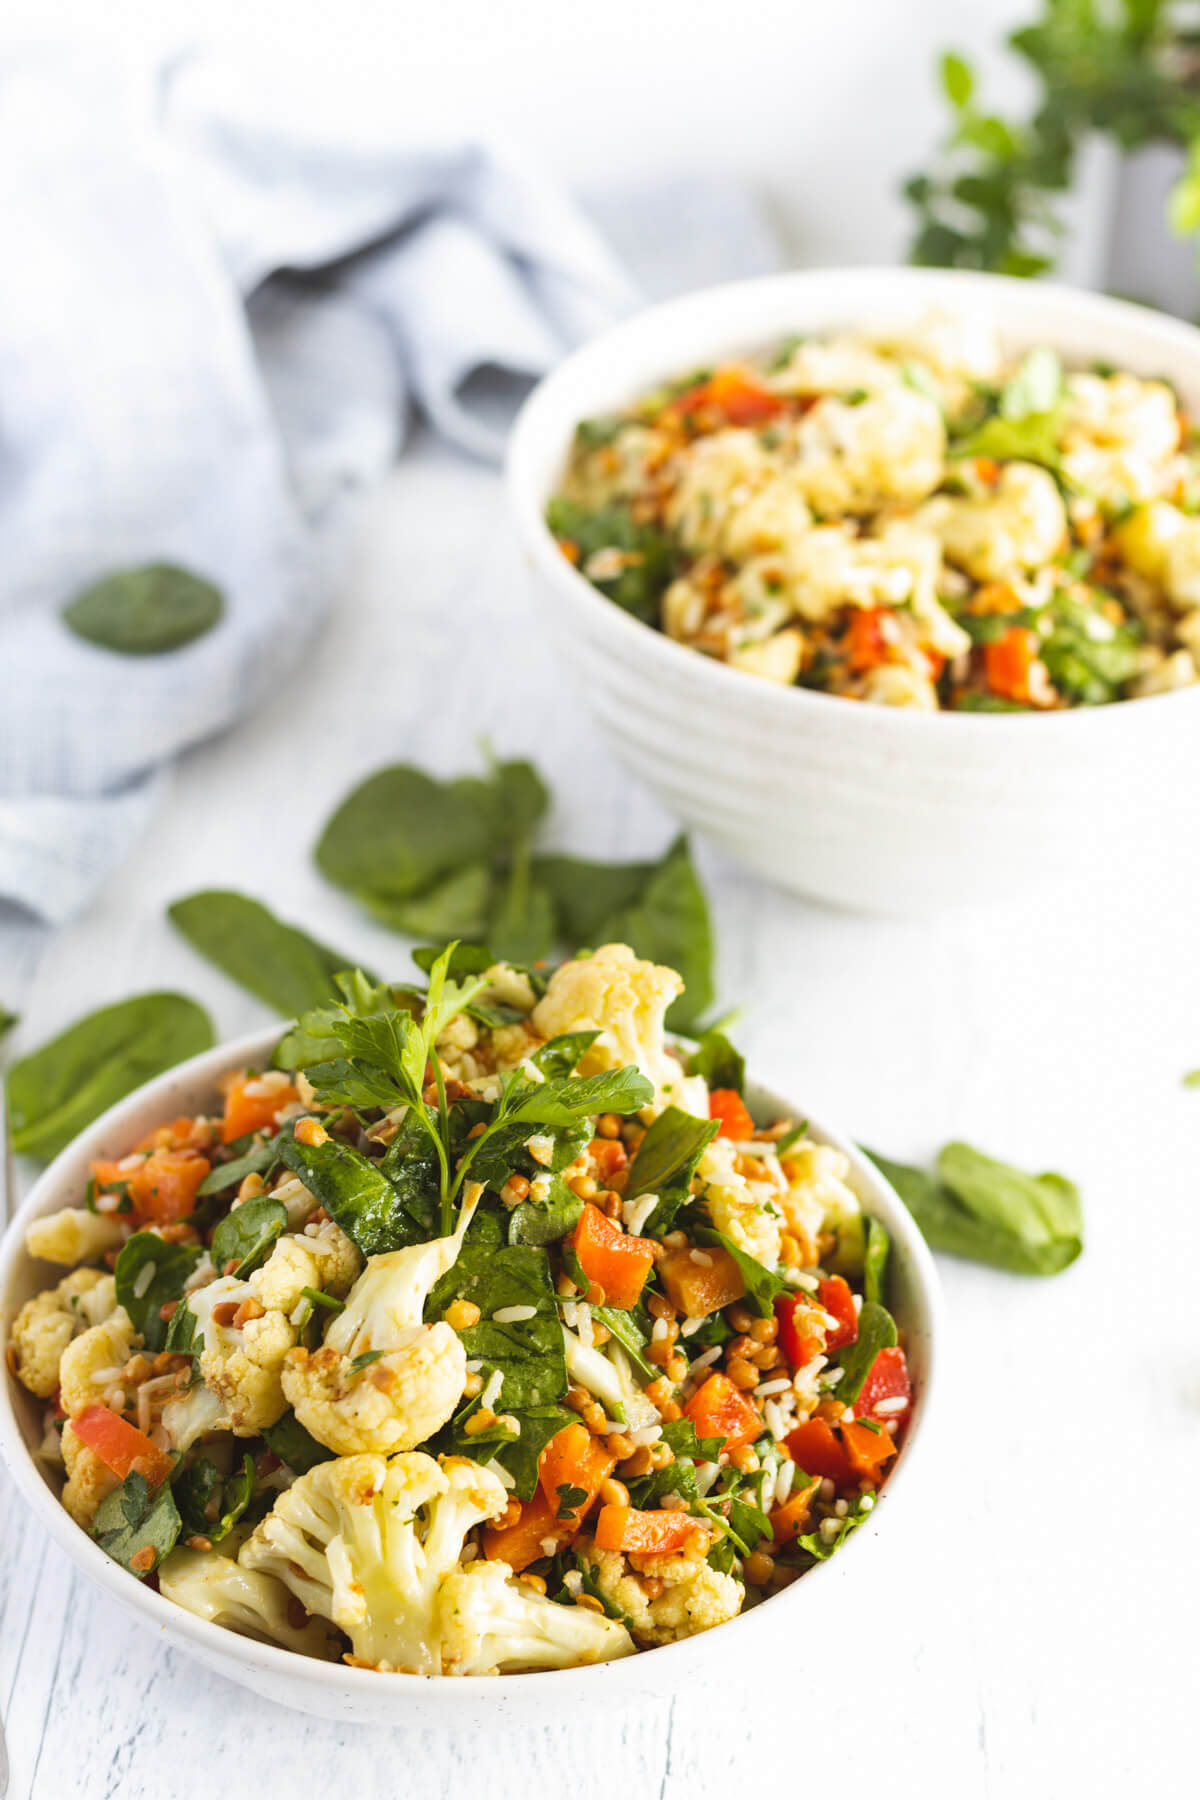 White bowls containing servings of vibrant roasted cauliflower salad.